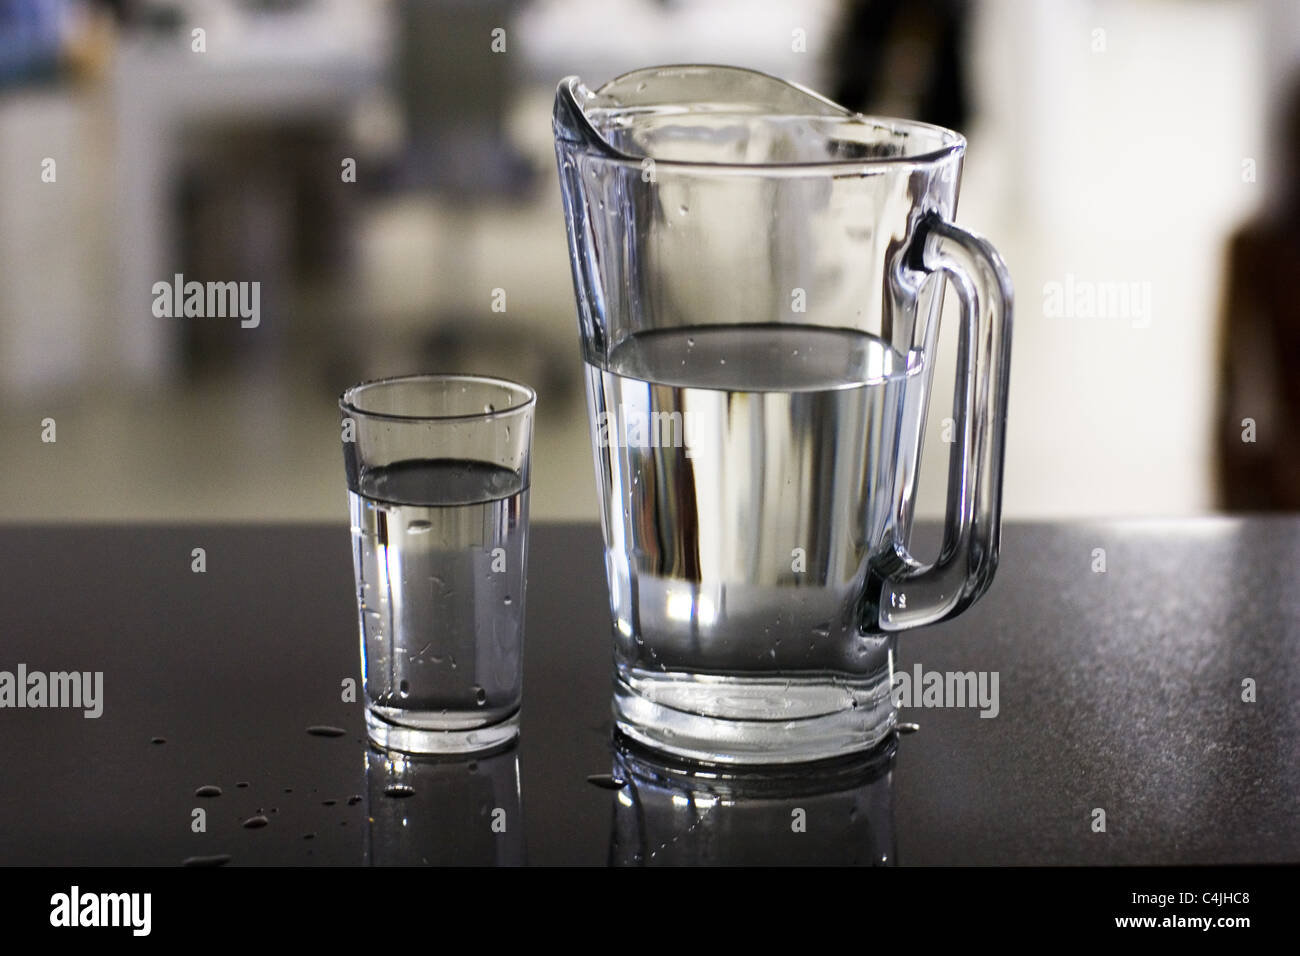 https://c8.alamy.com/comp/C4JHC8/water-glass-and-carafe-C4JHC8.jpg